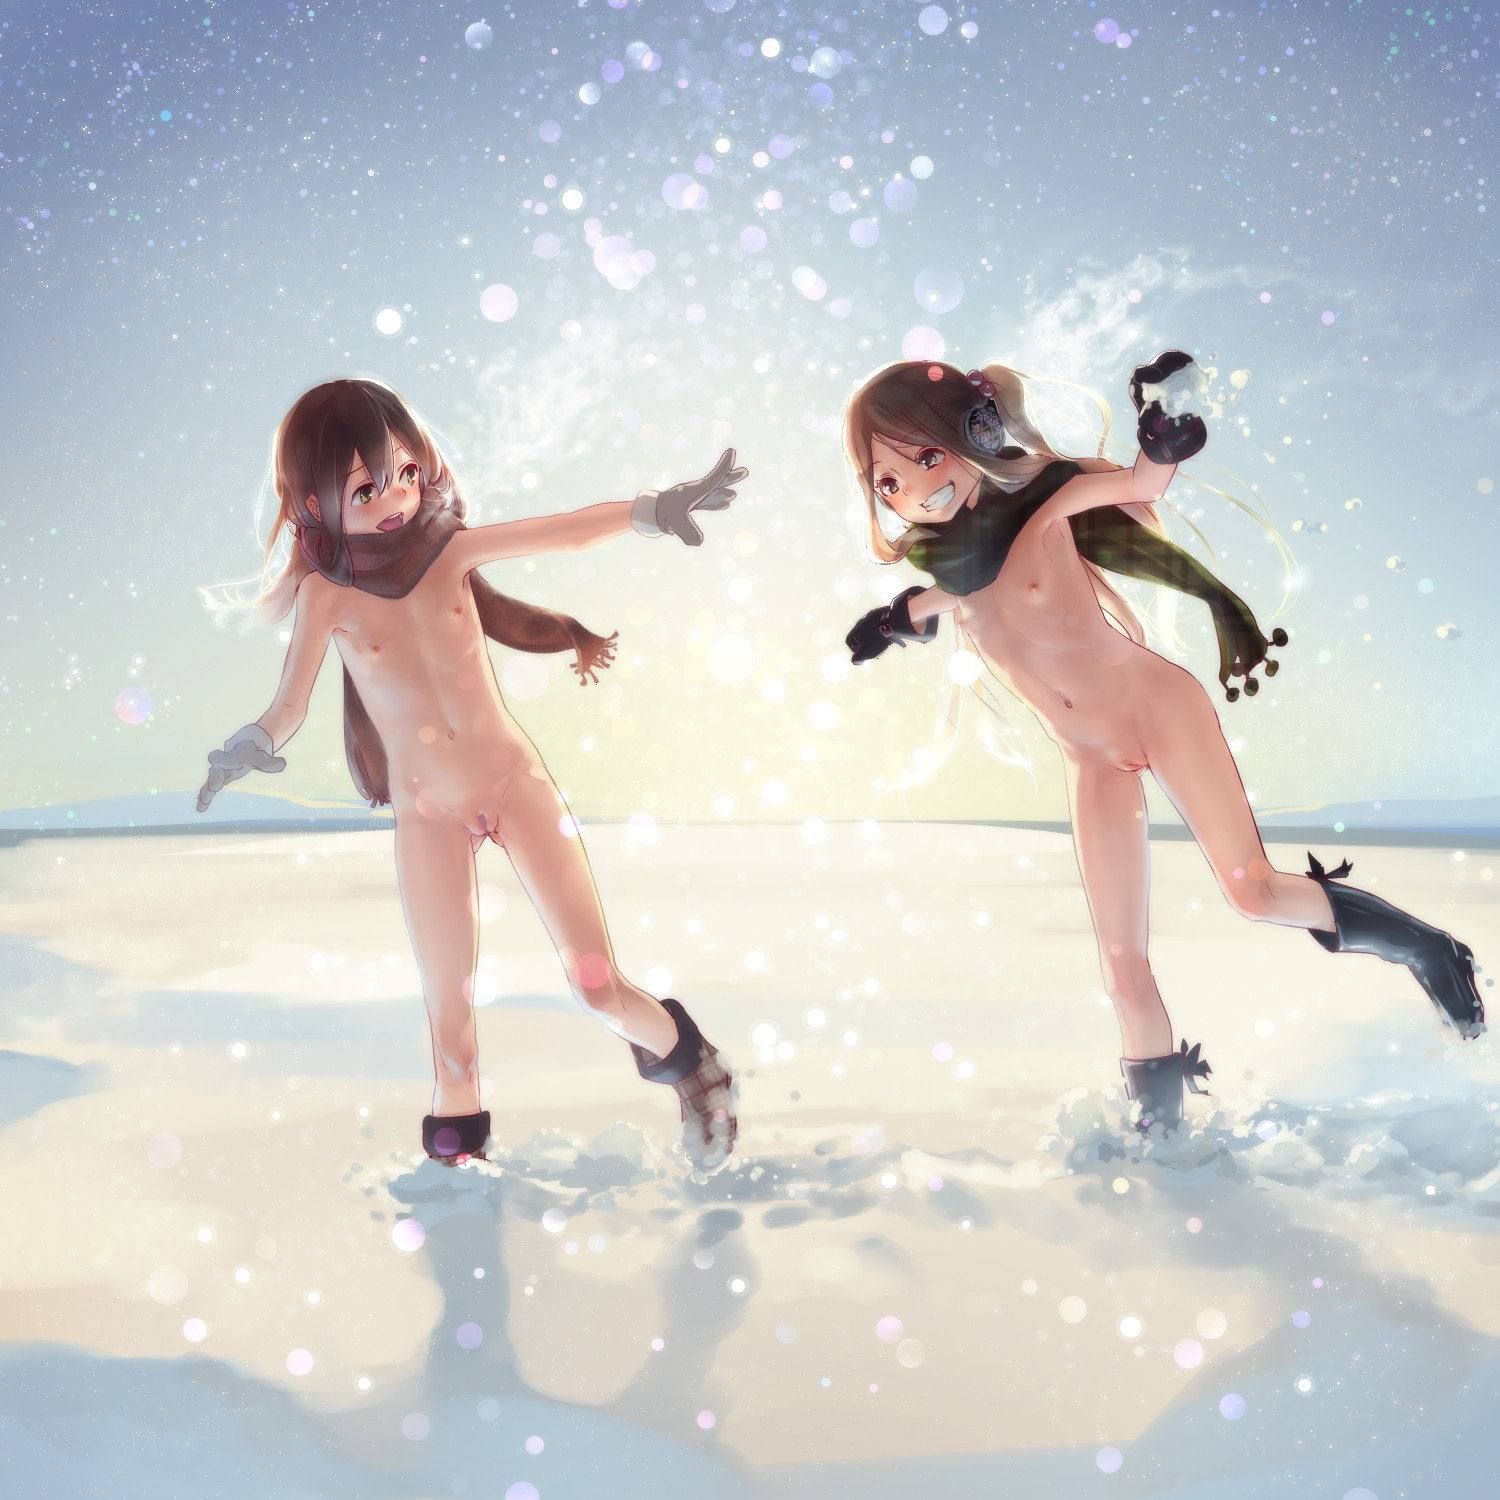 When it snows heavily, it is variously difficult, but I think that the girl playing in the snow is cute and good. 5